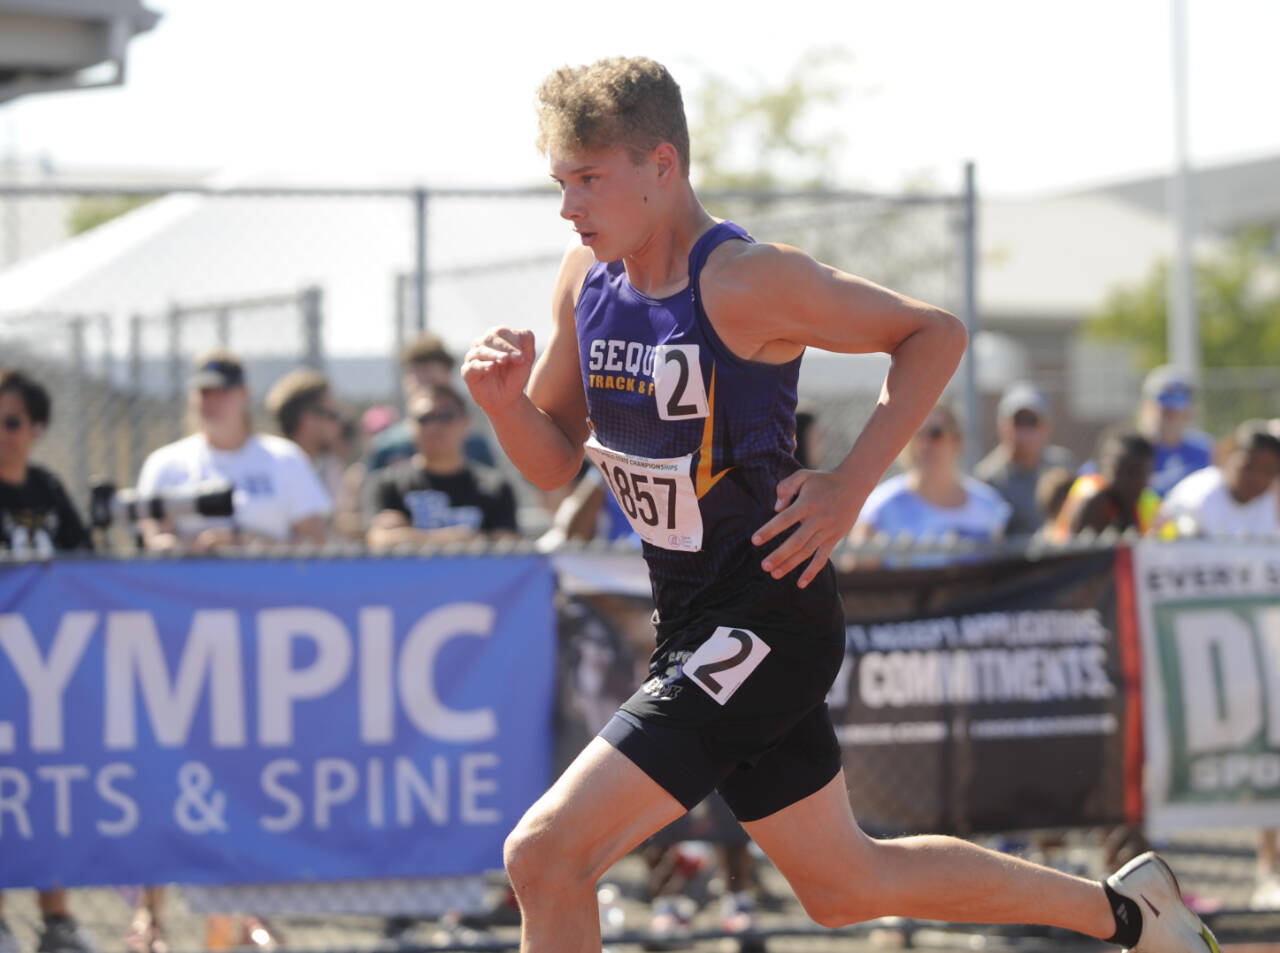 Sequim High sophomore Sean Southard breaks from the start in the 400-meter race at the Class 2A state track and field championships in Tacoma on May 26. Southard finished 16th overall in 53.11 seconds.